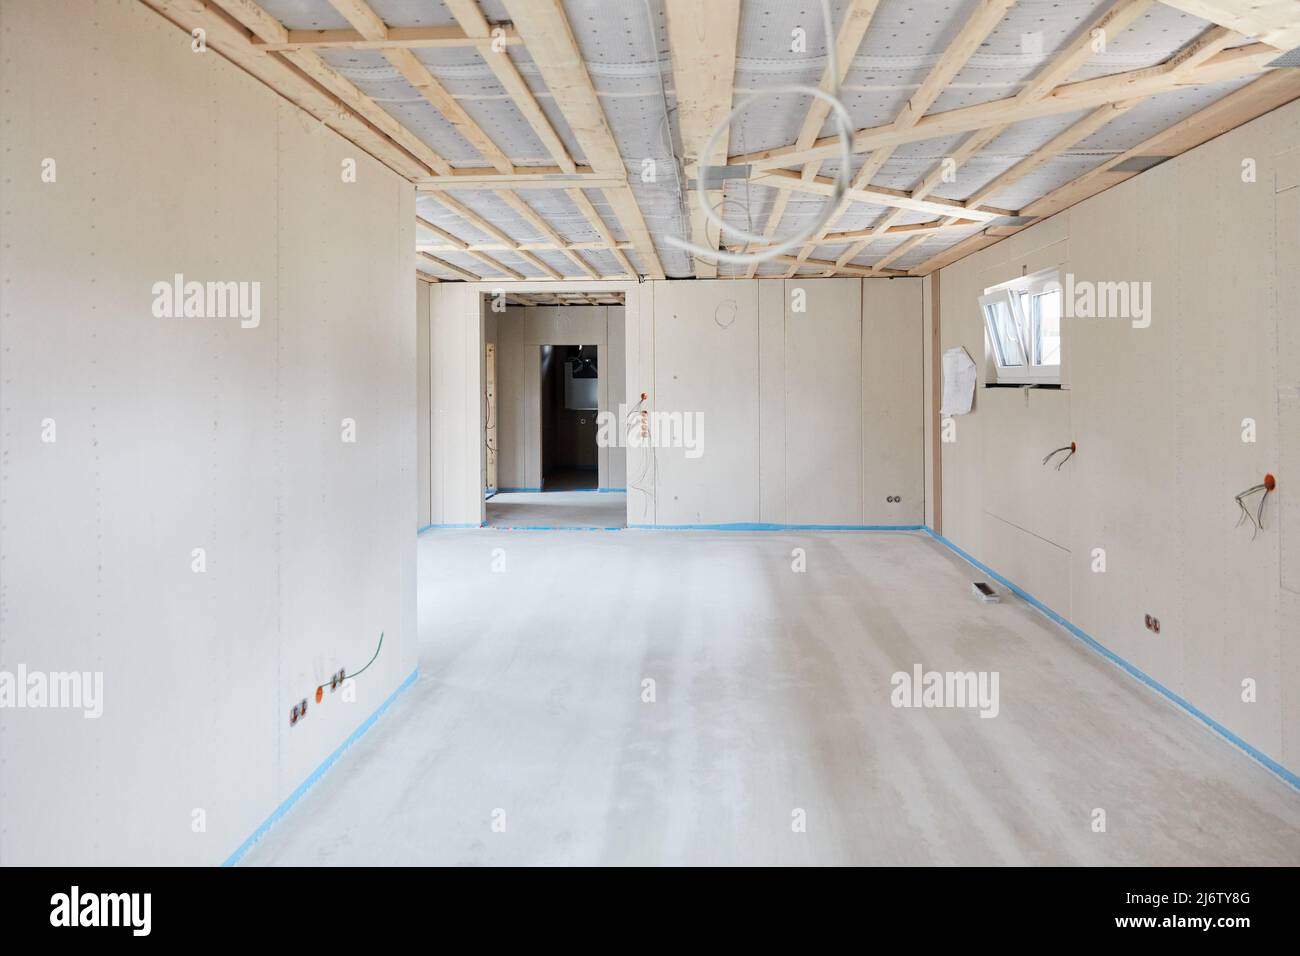 Laying screed during interior design in house during new construction project Stock Photo